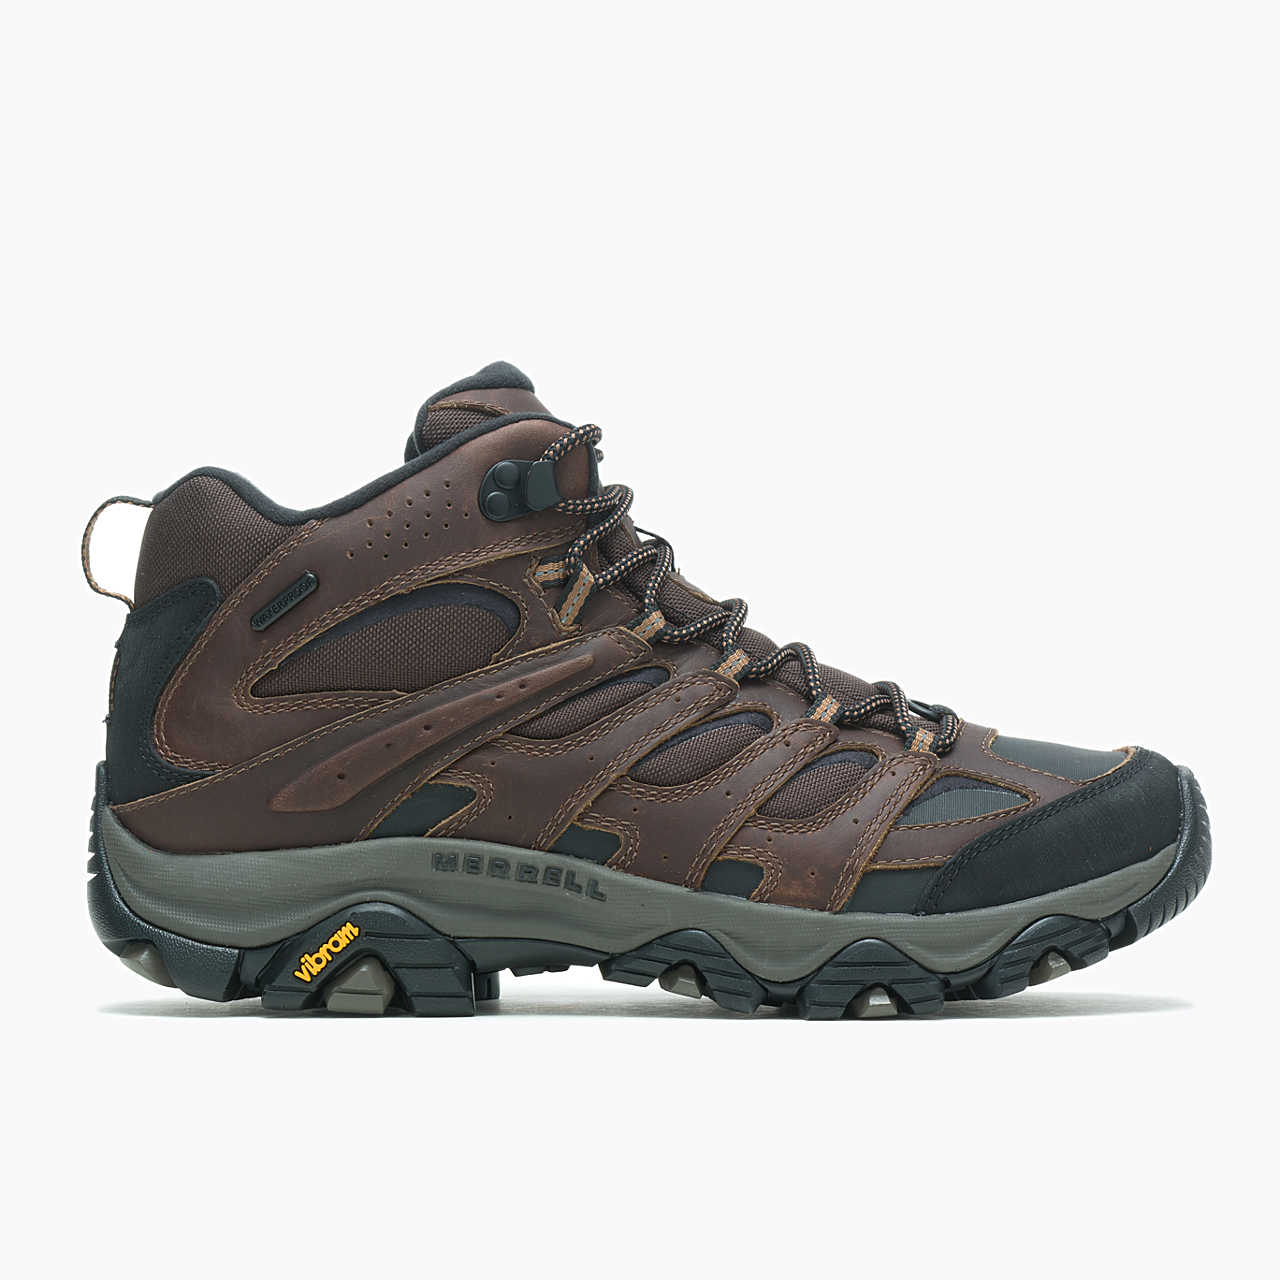 Moab 3 Thermo Mid Waterproof Wide Width - Boots | Merrell